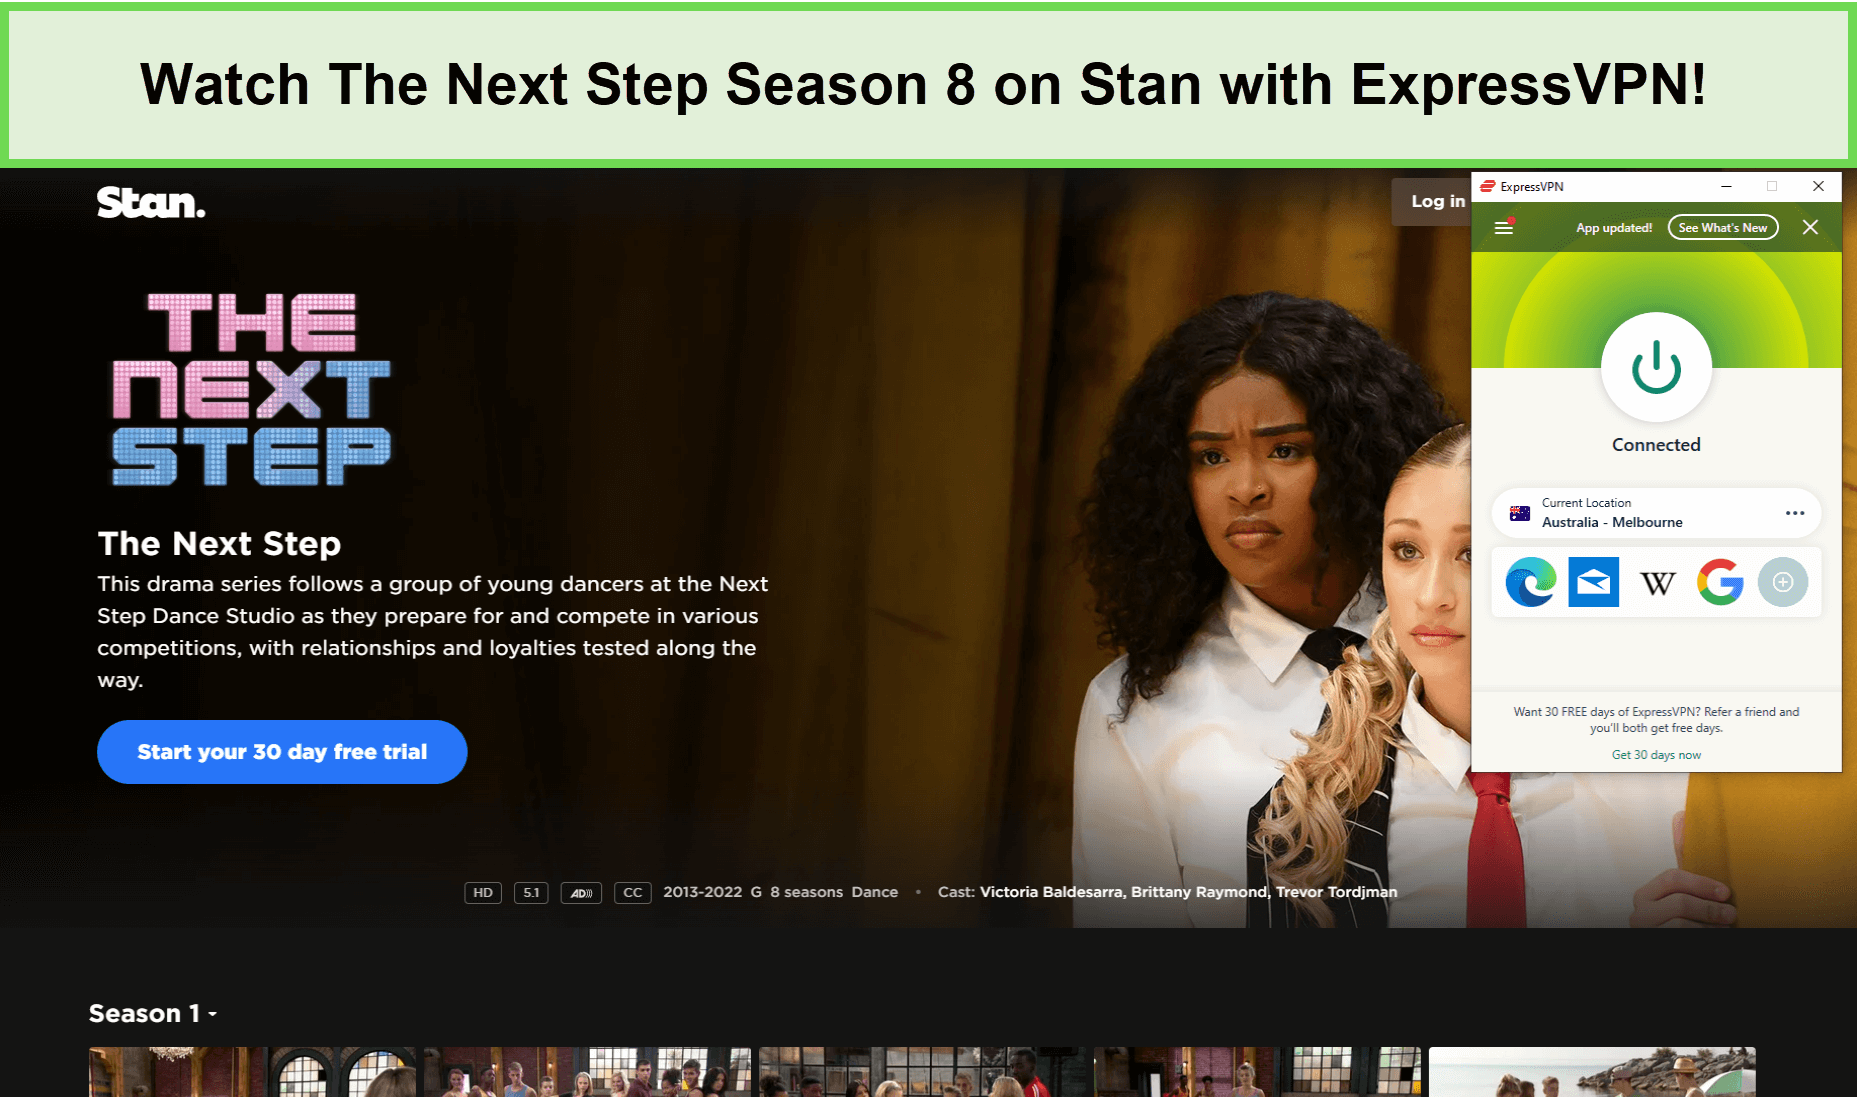 Watch-The-Next-Step-Season-8-in-New Zealand-on-Stan-with-ExpressVPN